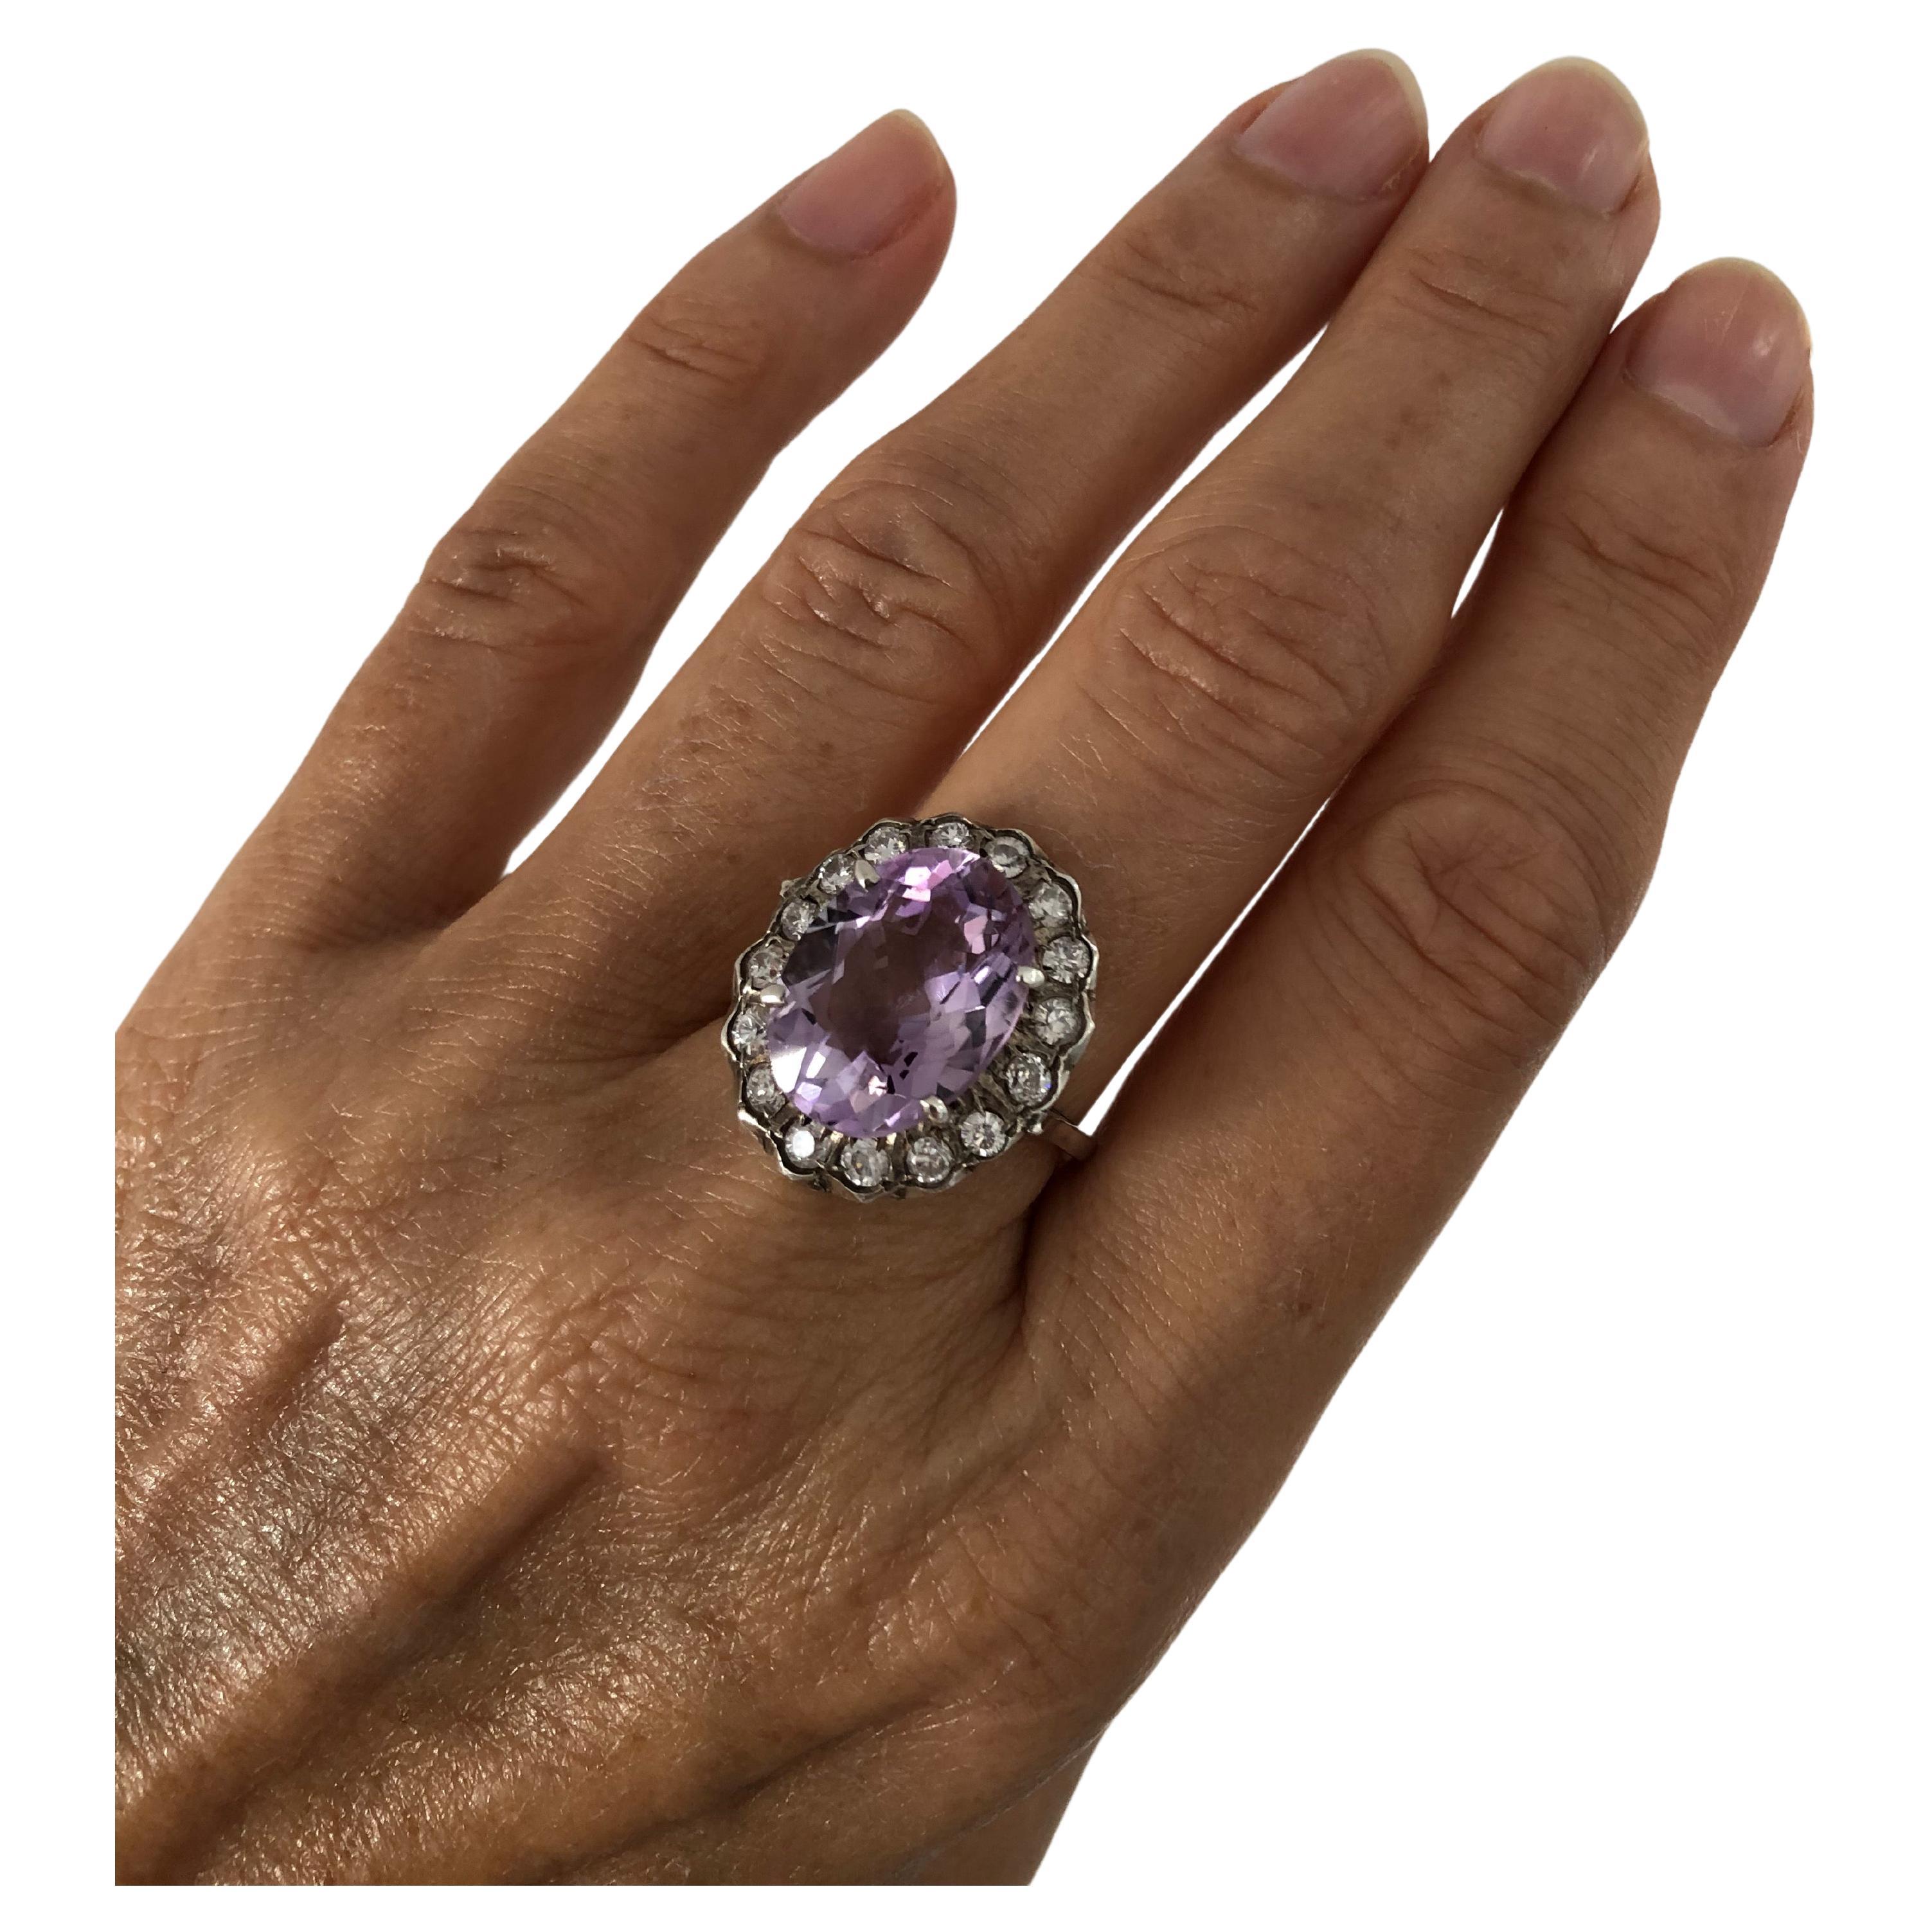 Vintage European ring, beautiful large amethyst surrounded with a glittering cubic zirconia mounted in sterling silver marked 925. Stunning statement cocktail ring. Measuring about 0.82inch by 0.76 inch, weight about 7.50 grams.